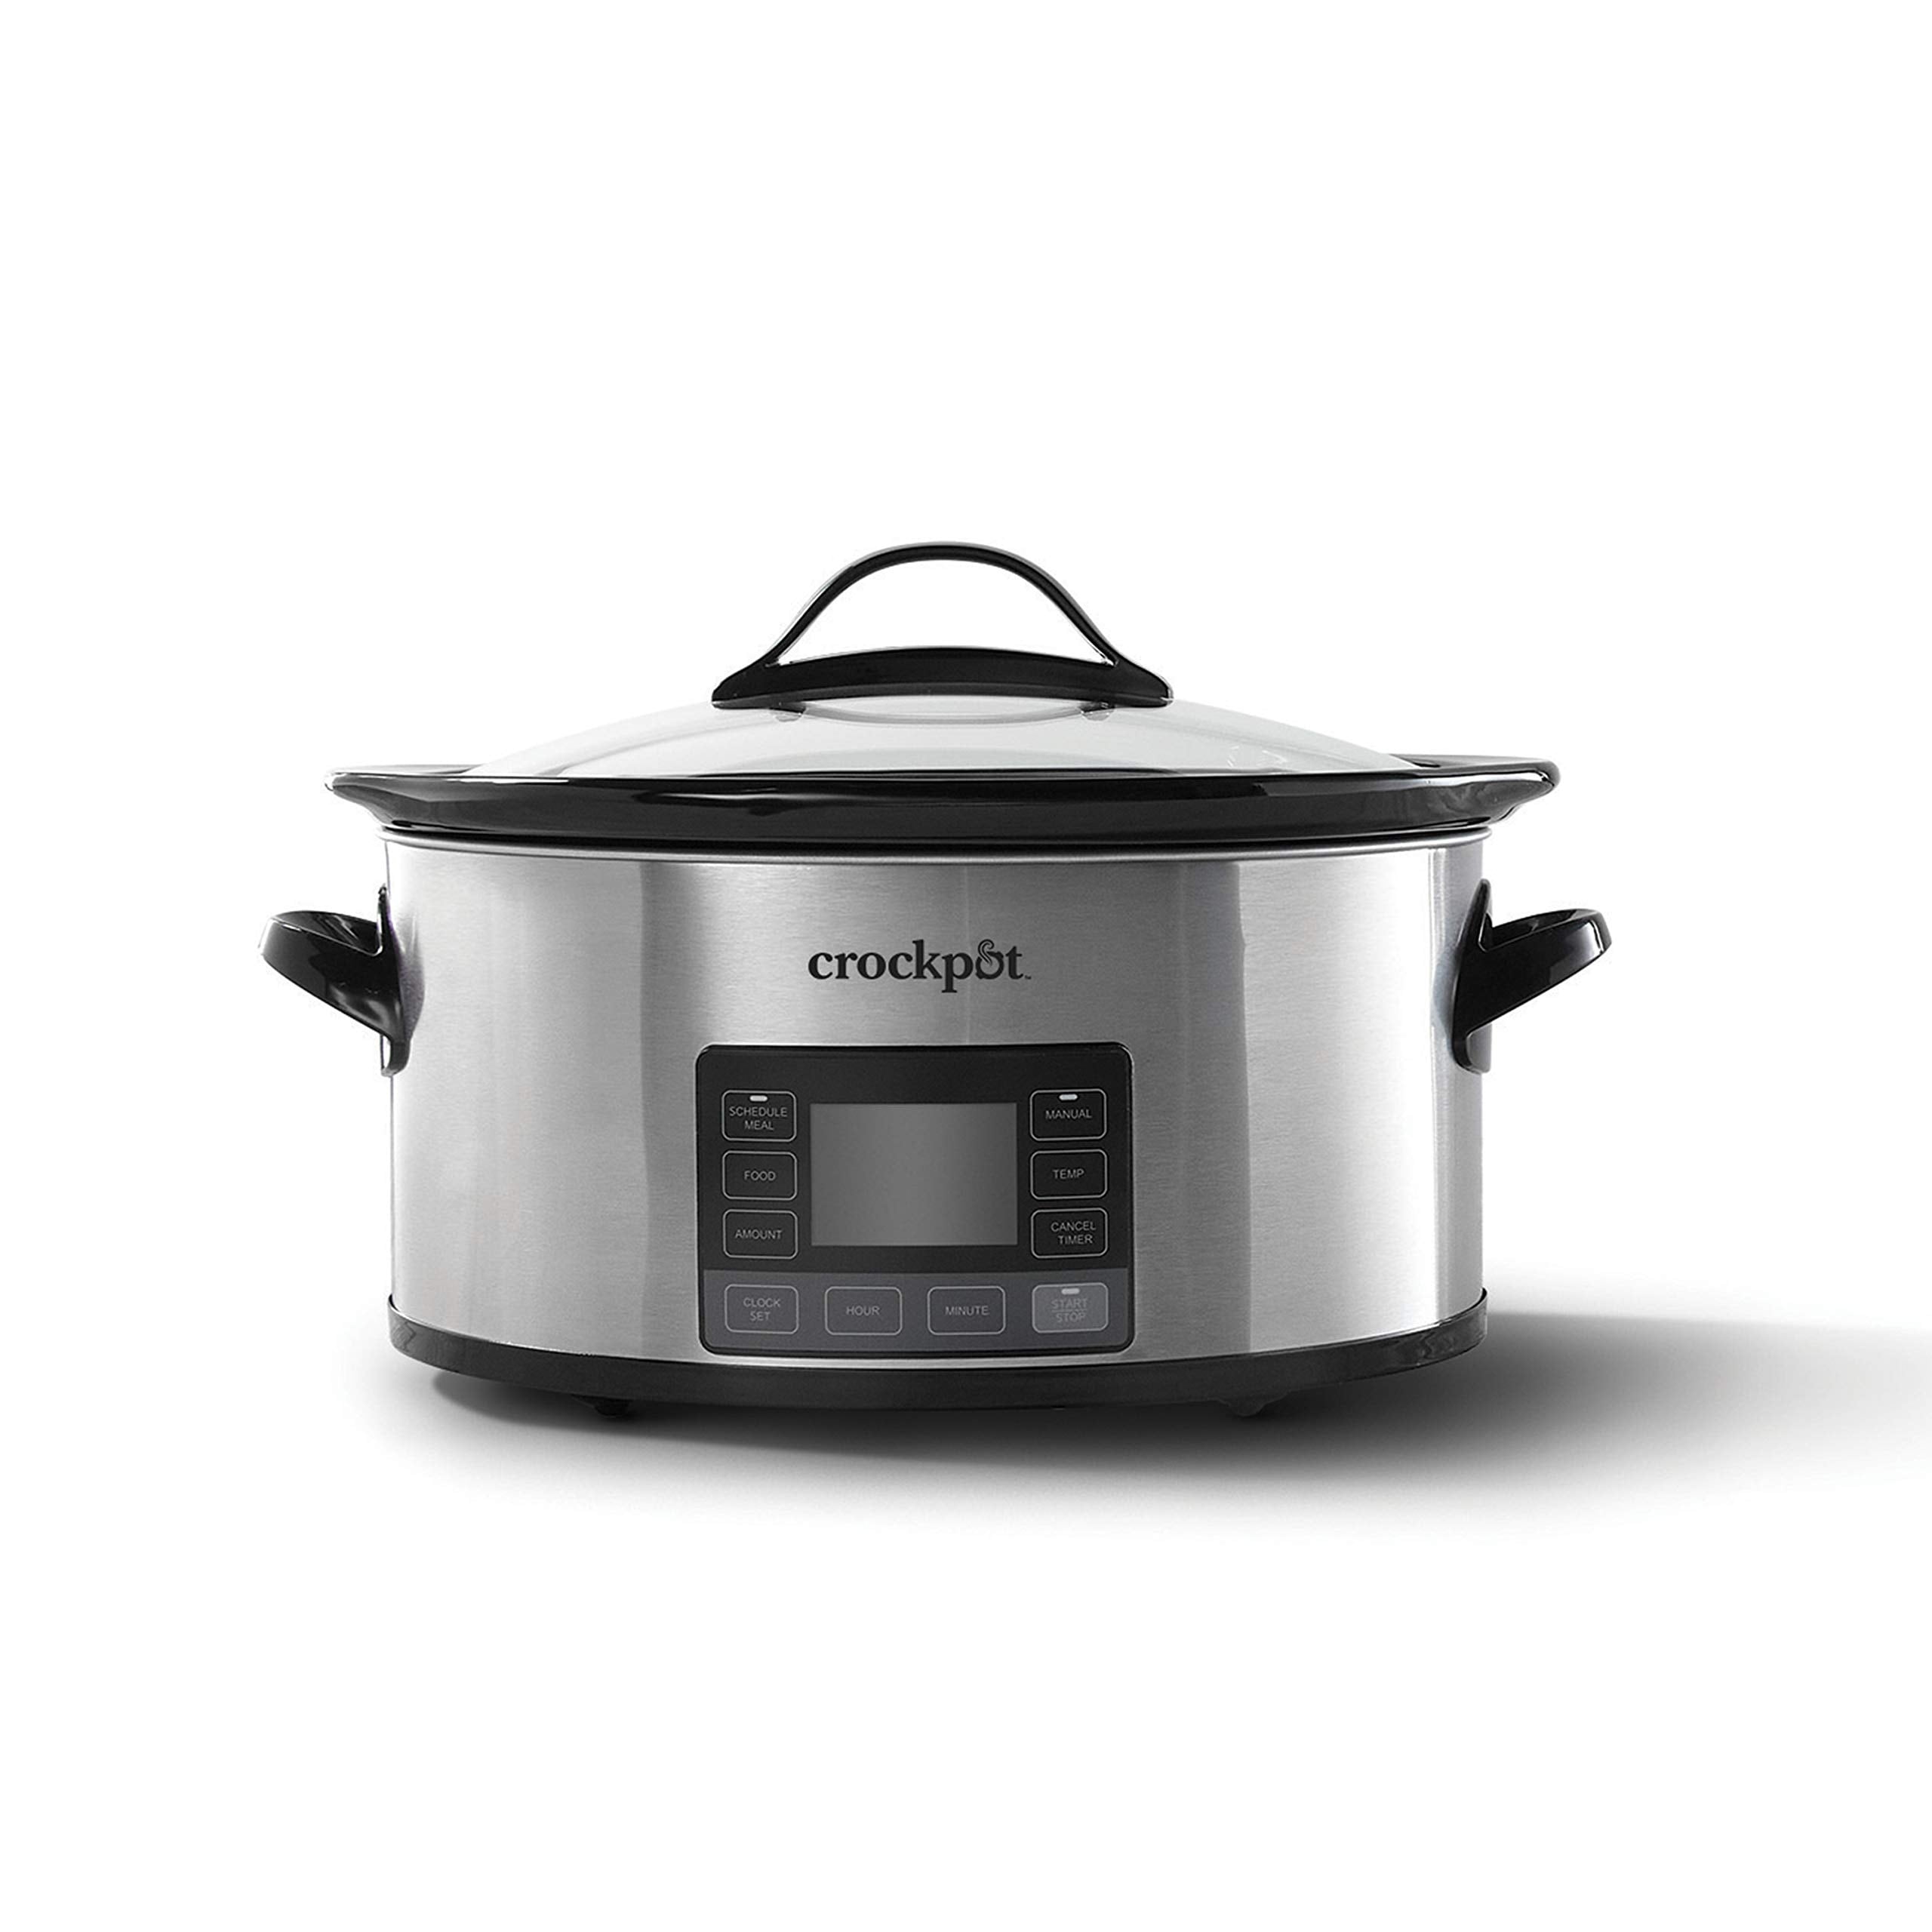 https://ak1.ostkcdn.com/images/products/is/images/direct/dce30b646c8ab32830b4c6d107b7ea5599138369/MyTime-Technology-6-Quart-Programmable-Slow-Cooker-and-Food-Warmer-with-Digital-Timer%2C-Stainless-Steel-Slow-Cooker.jpg